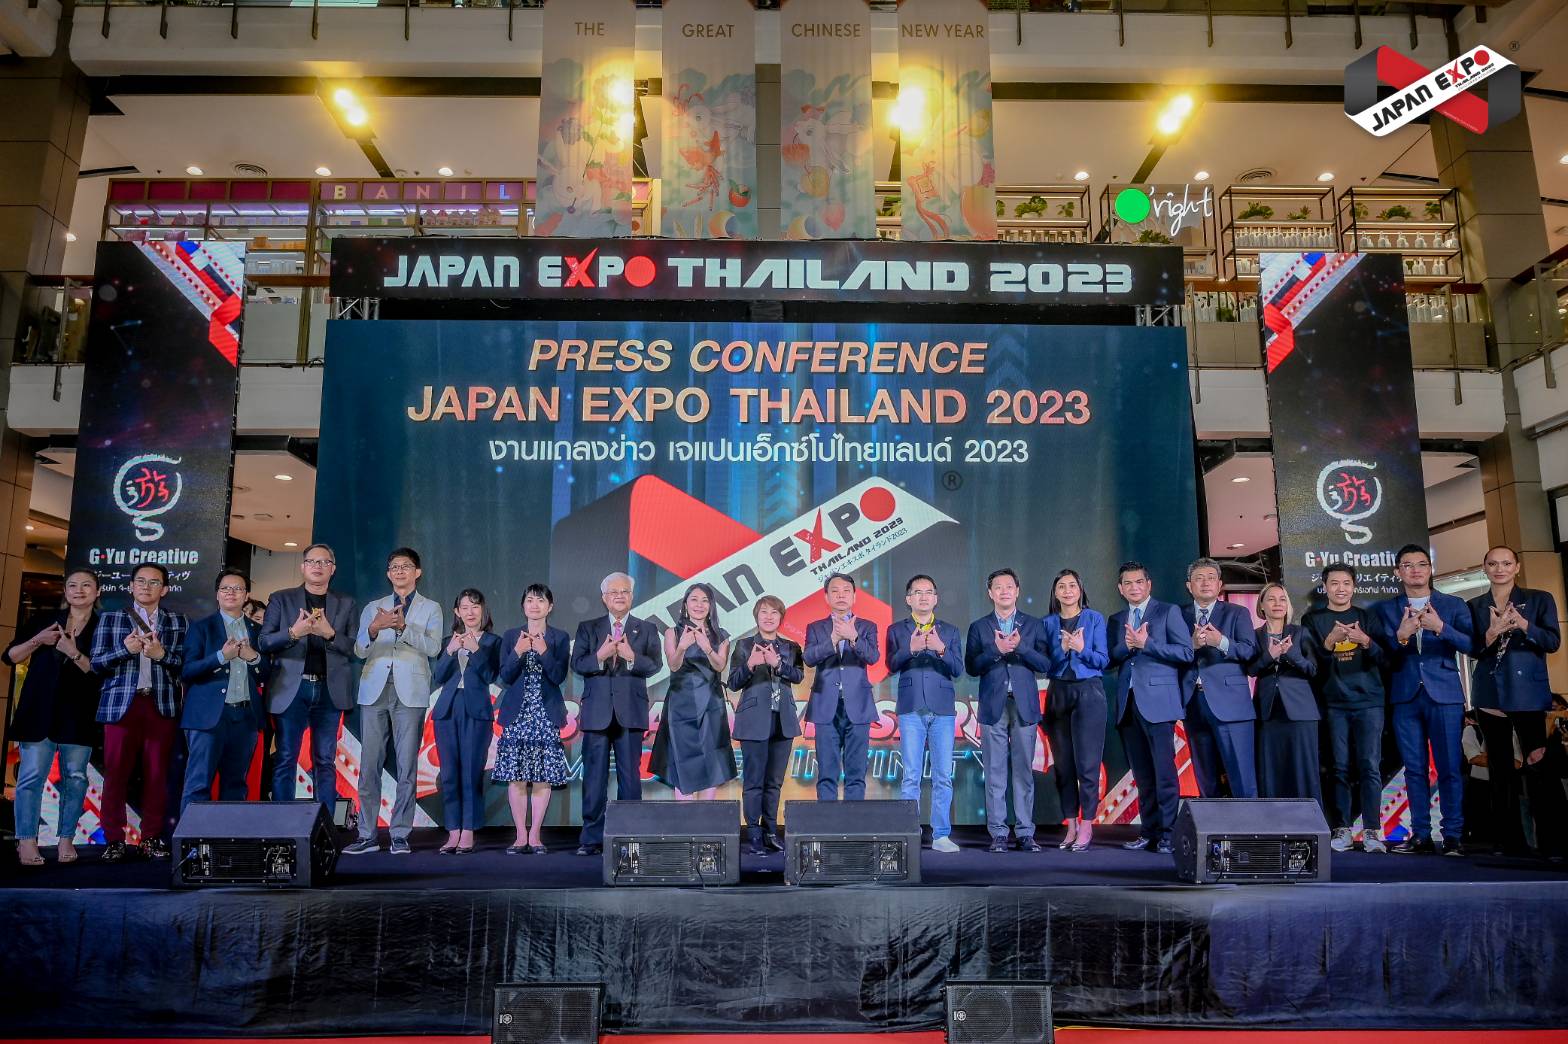 JAPAN EXPO THAILAND 2023 Press Conference